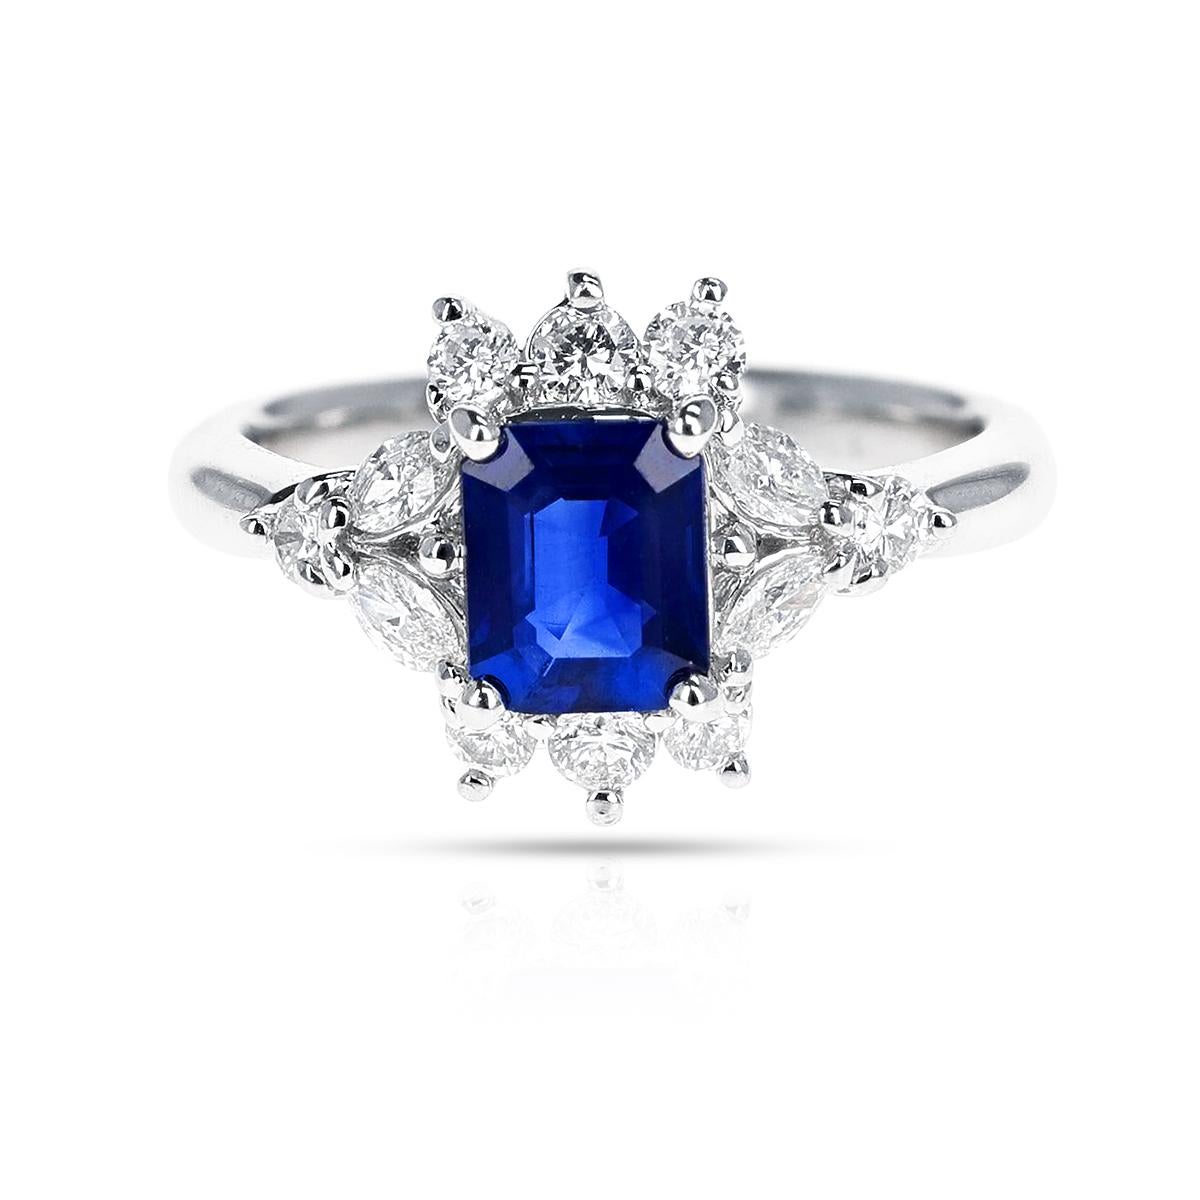 Emerald Cut 0.95 ct. Sapphire and Diamond Engagement Ring, Platinum For Sale